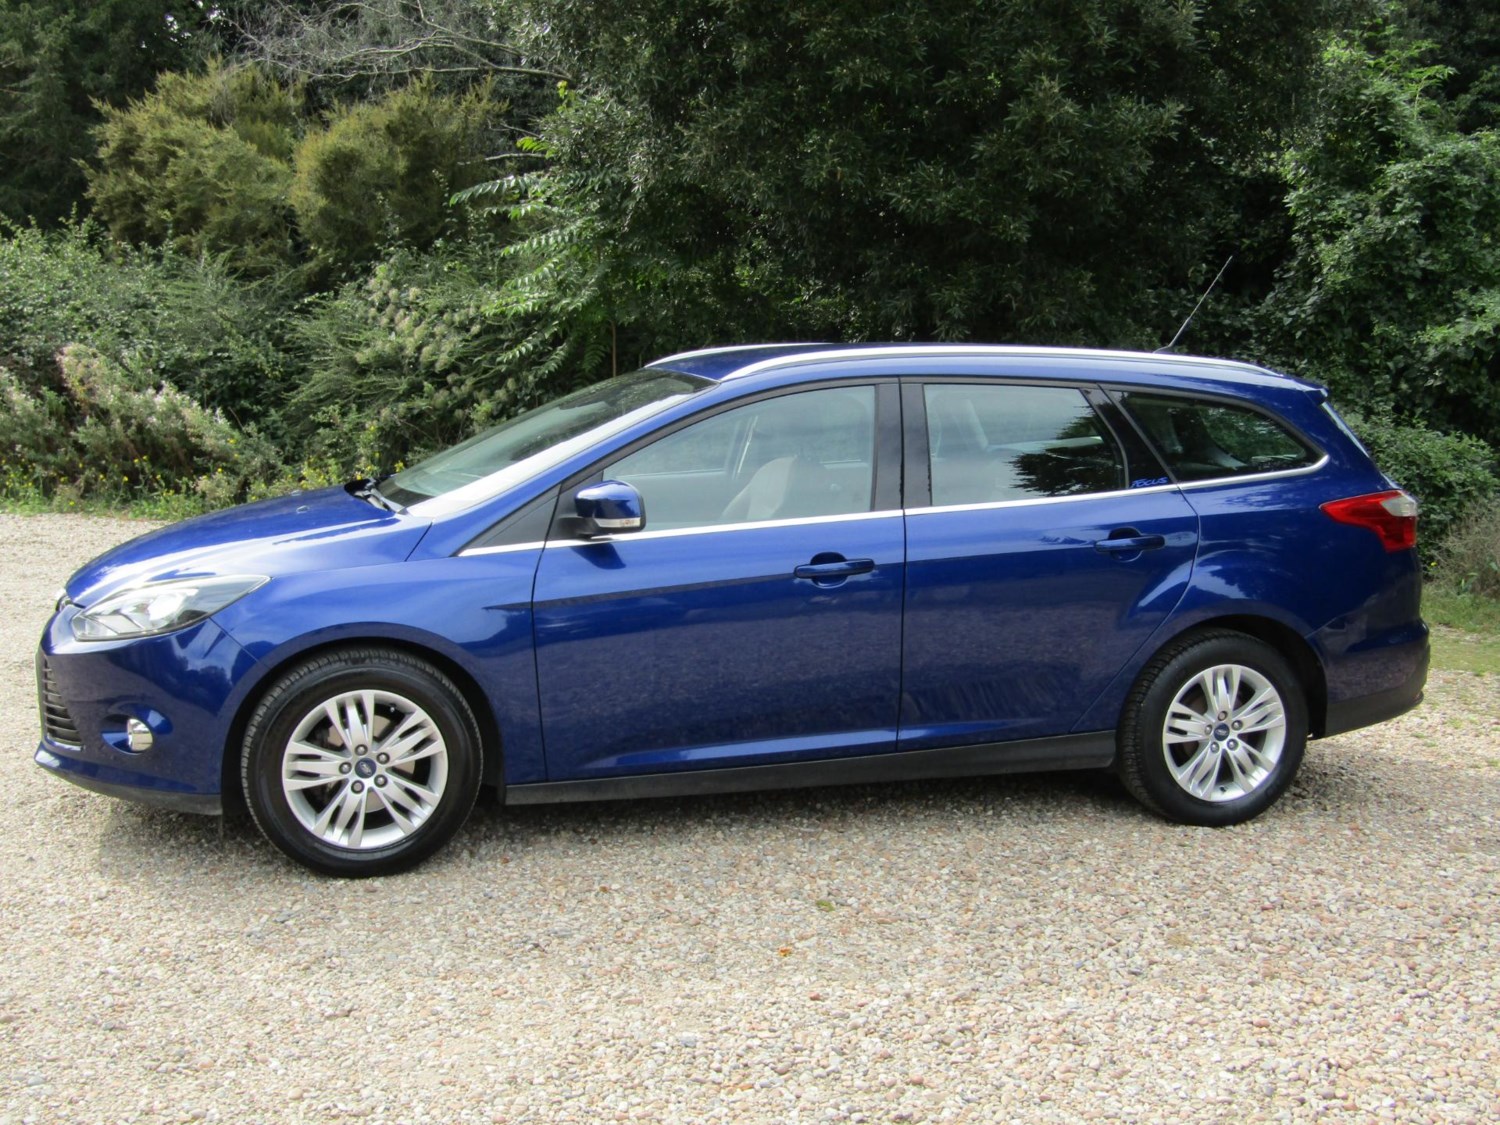 2014 (14) Ford Focus 1.6 TDCi 115 Titanium Navigator 5dr For Sale In Broadstairs, Kent